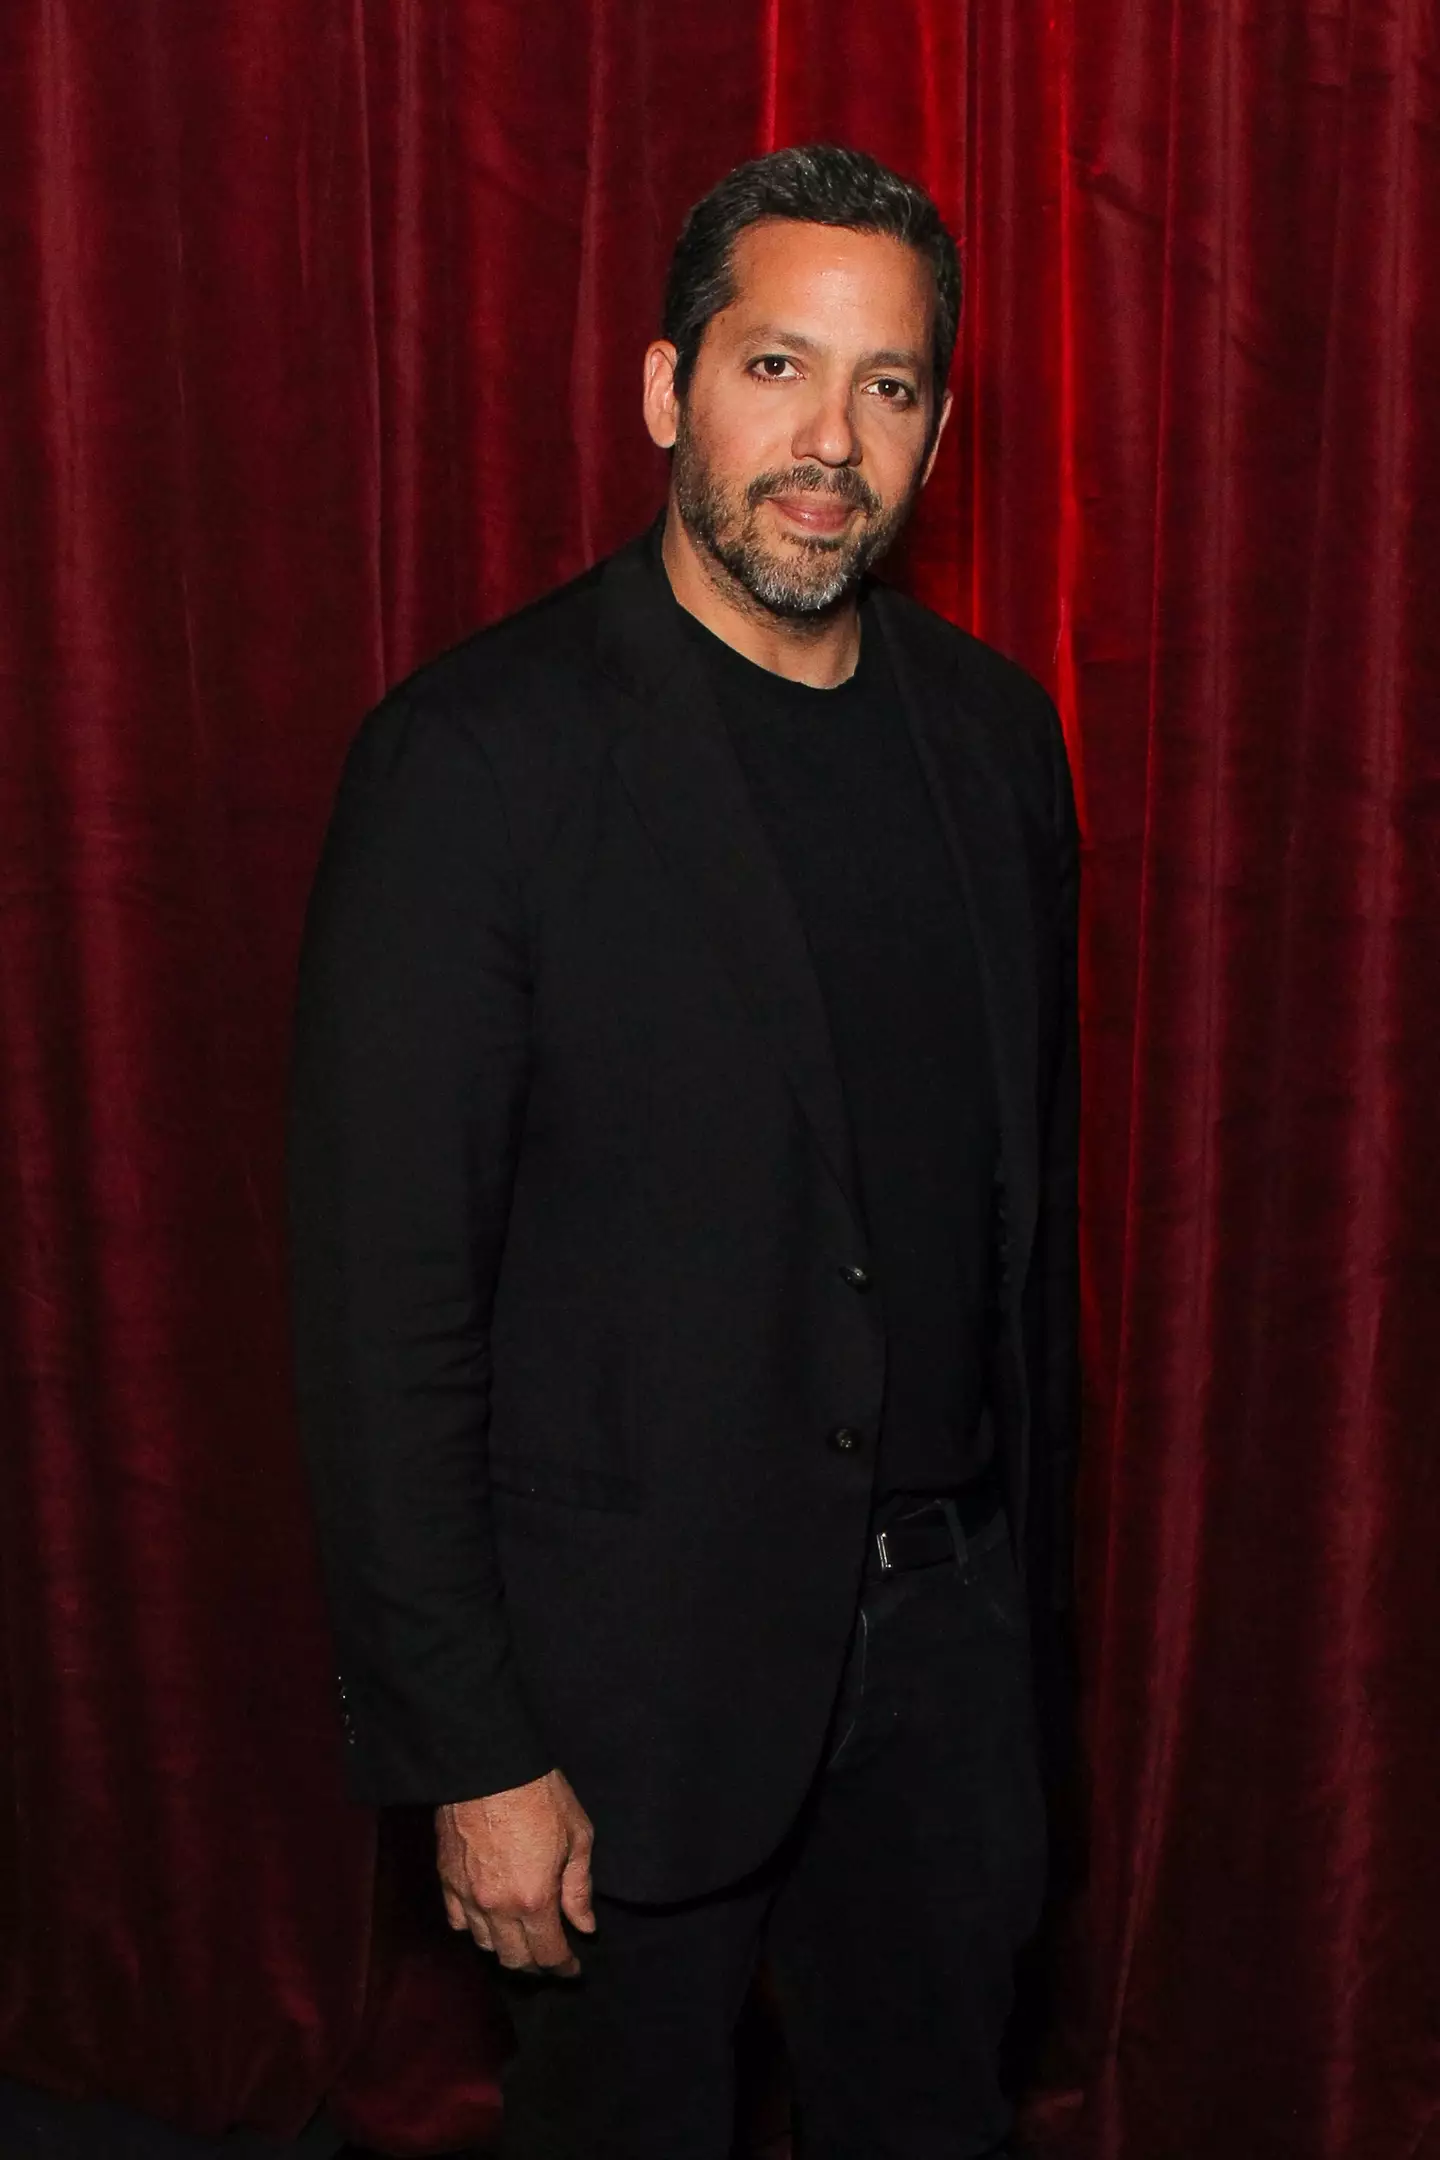 David Blaine has been on a worldwide trip to find new inspiration.